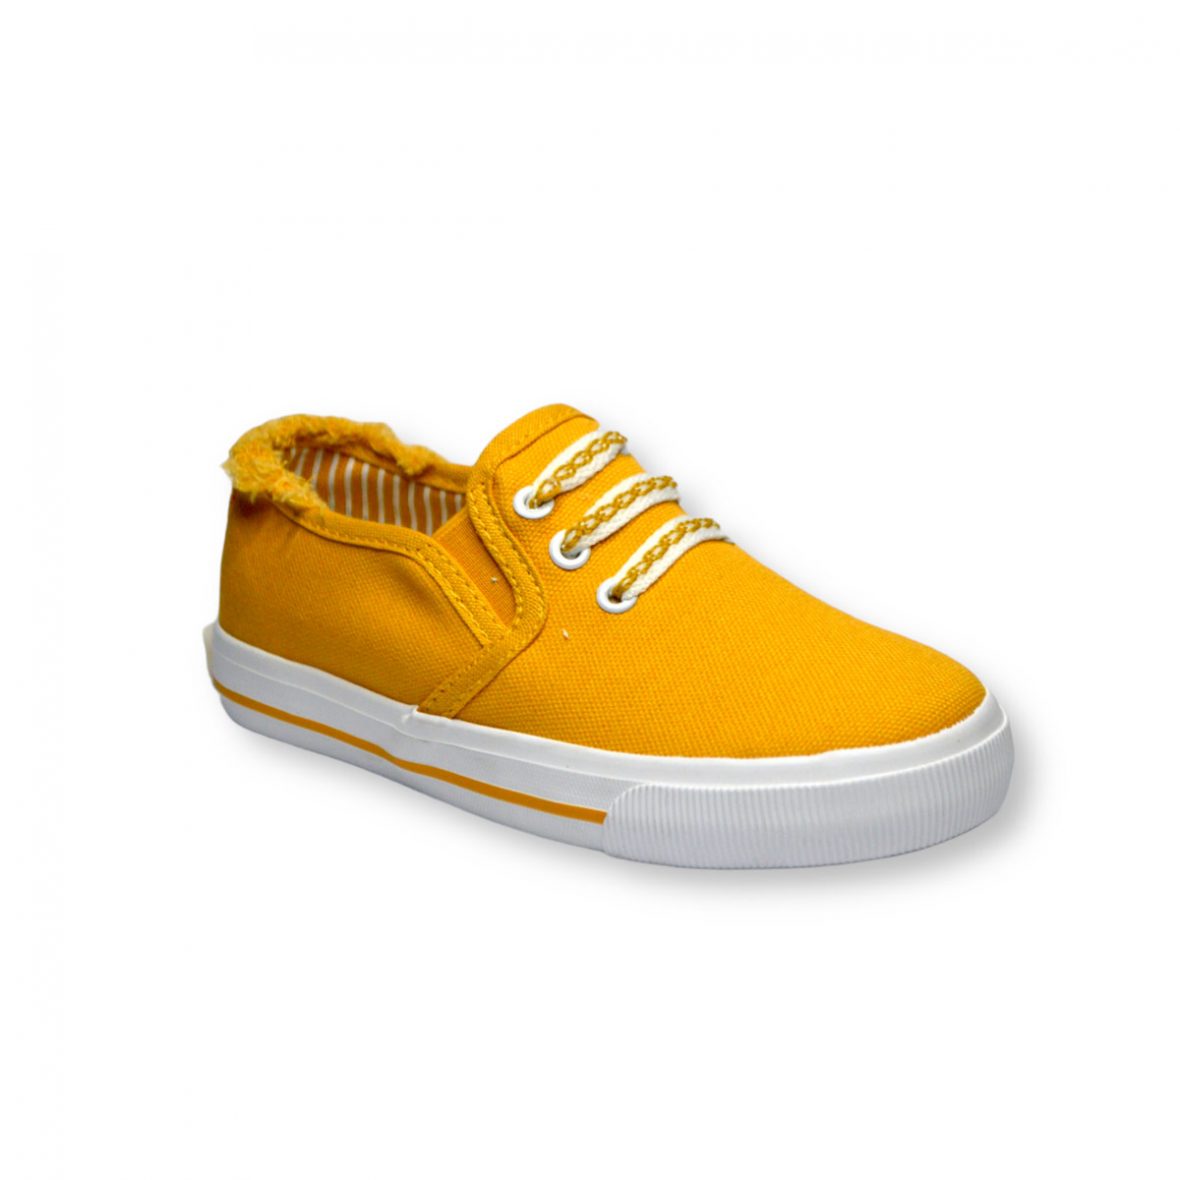 Lab iKid Unisex New Fashion Soft Canvas Shoes for Kids